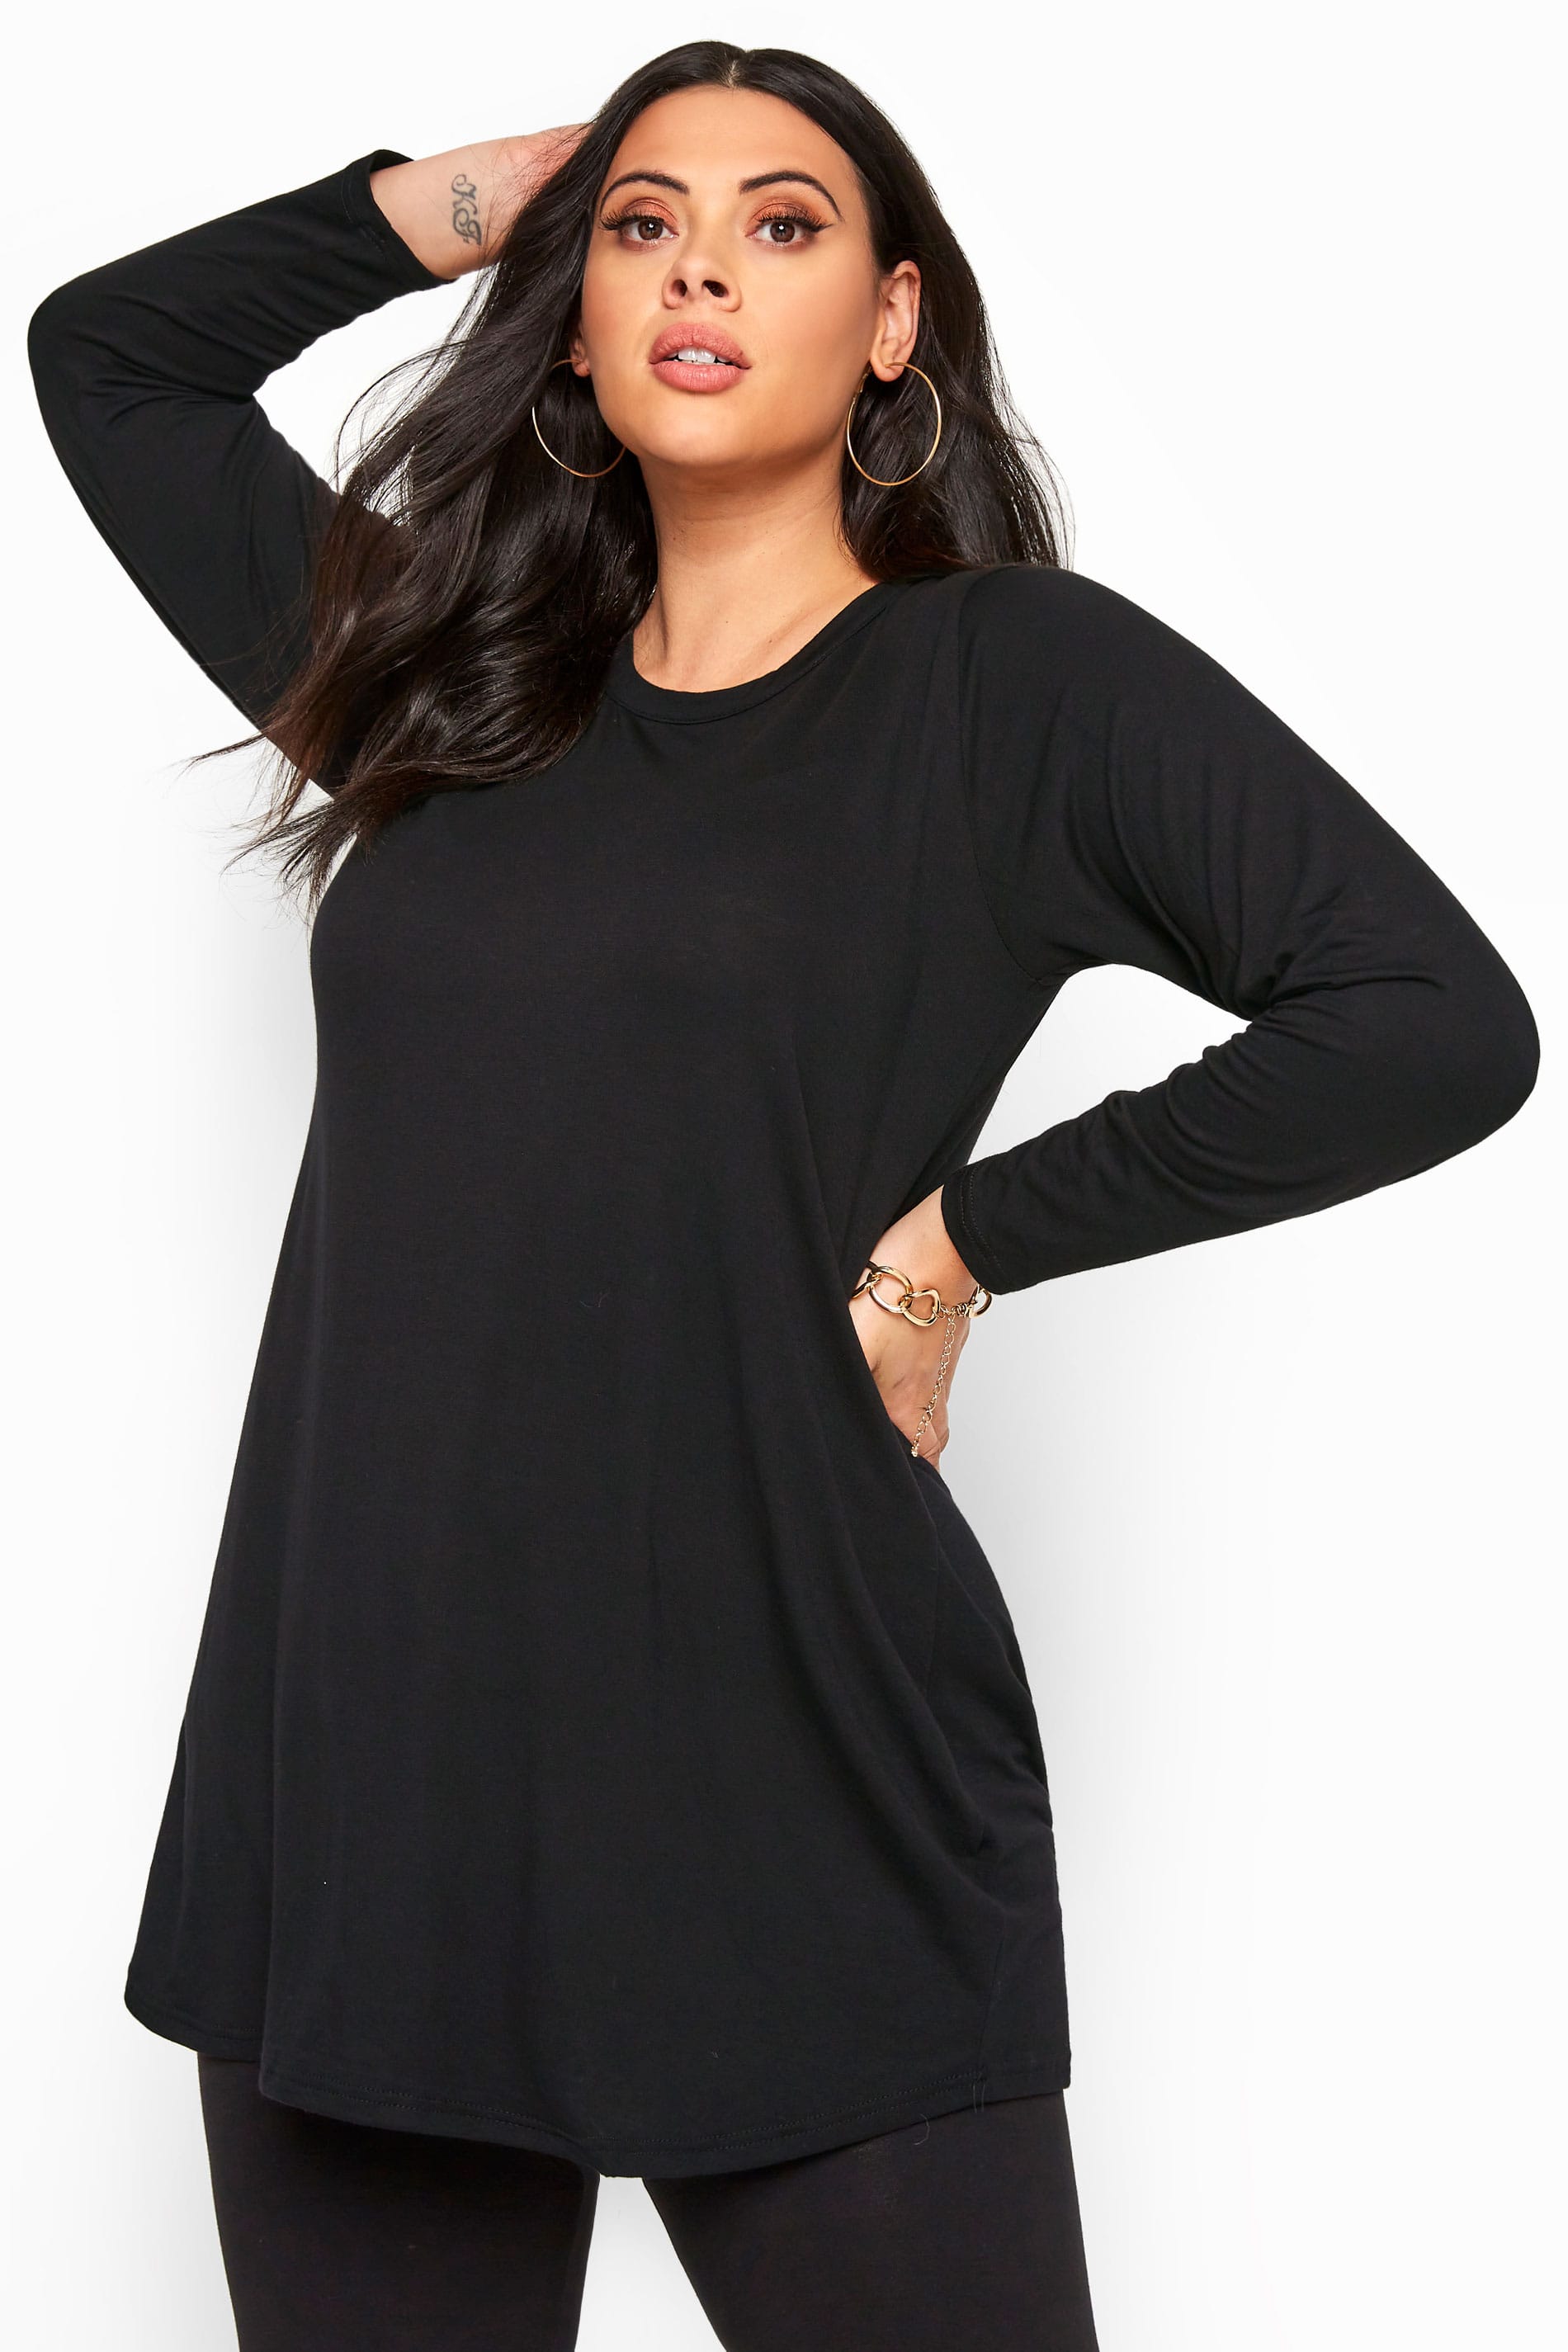 The Black Simmer Lituation Long Sleeved Top Recolor B